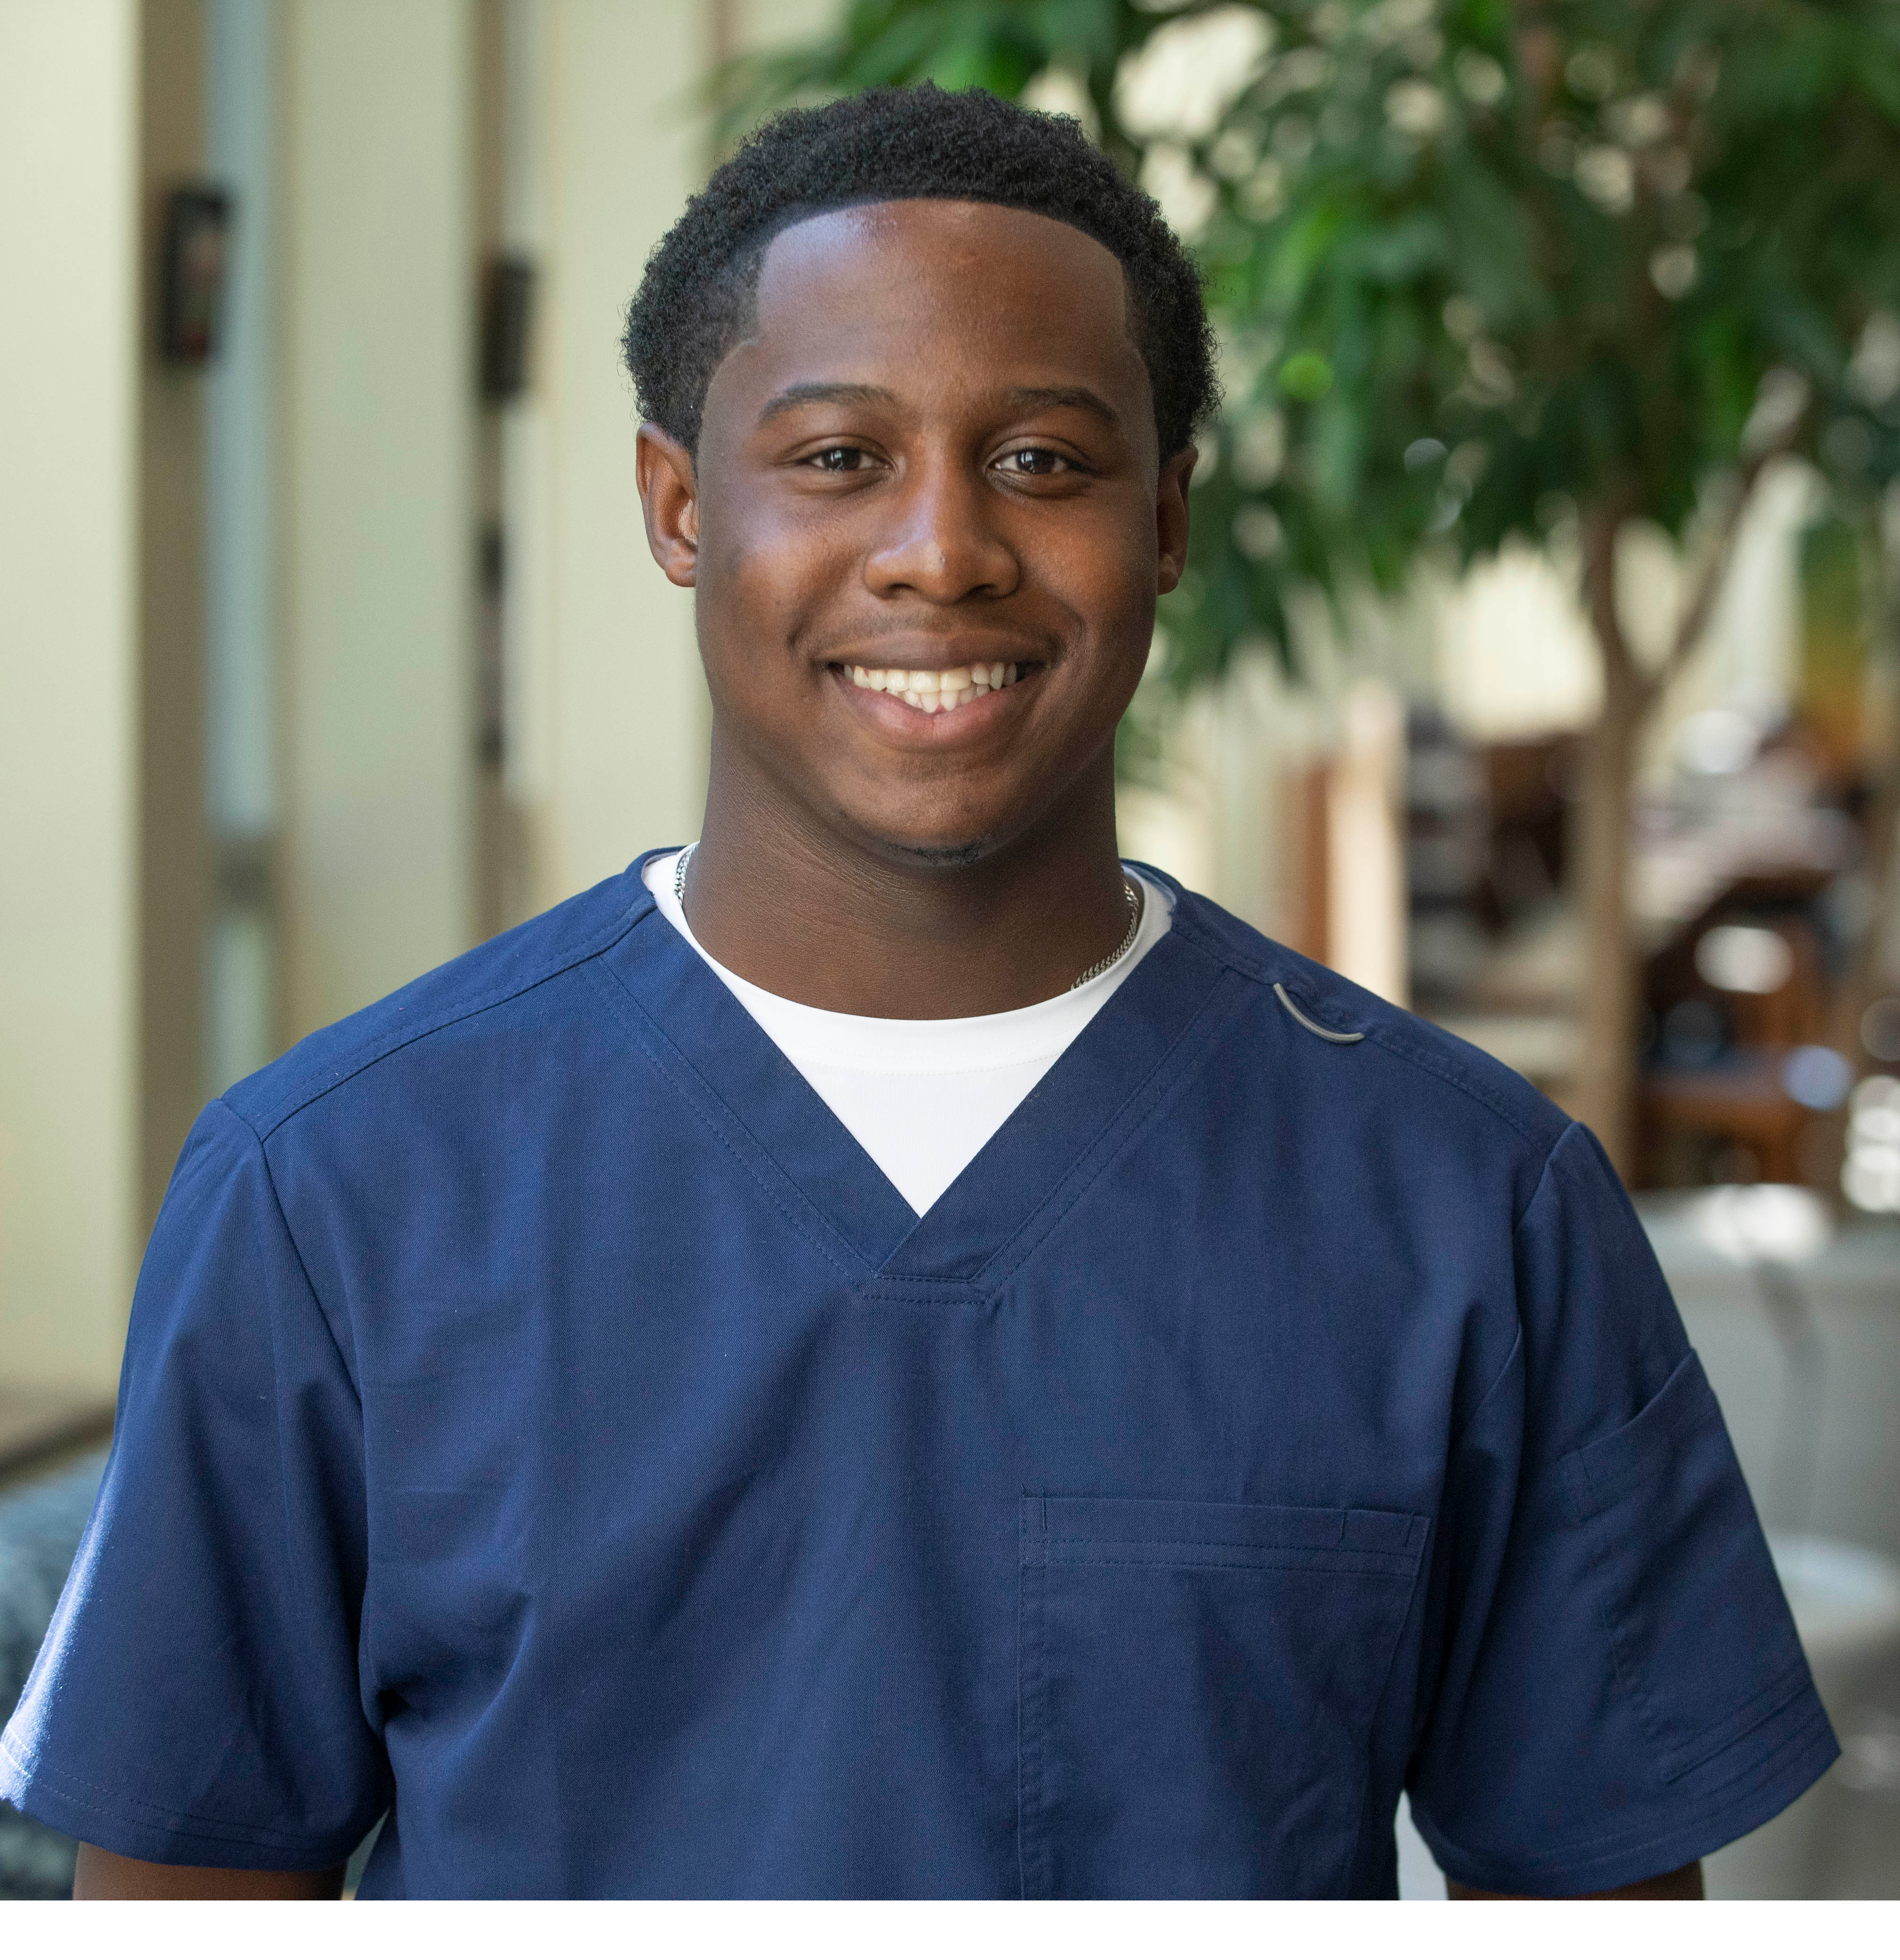 Student smiling and wearing medical scrubs standing outdoors